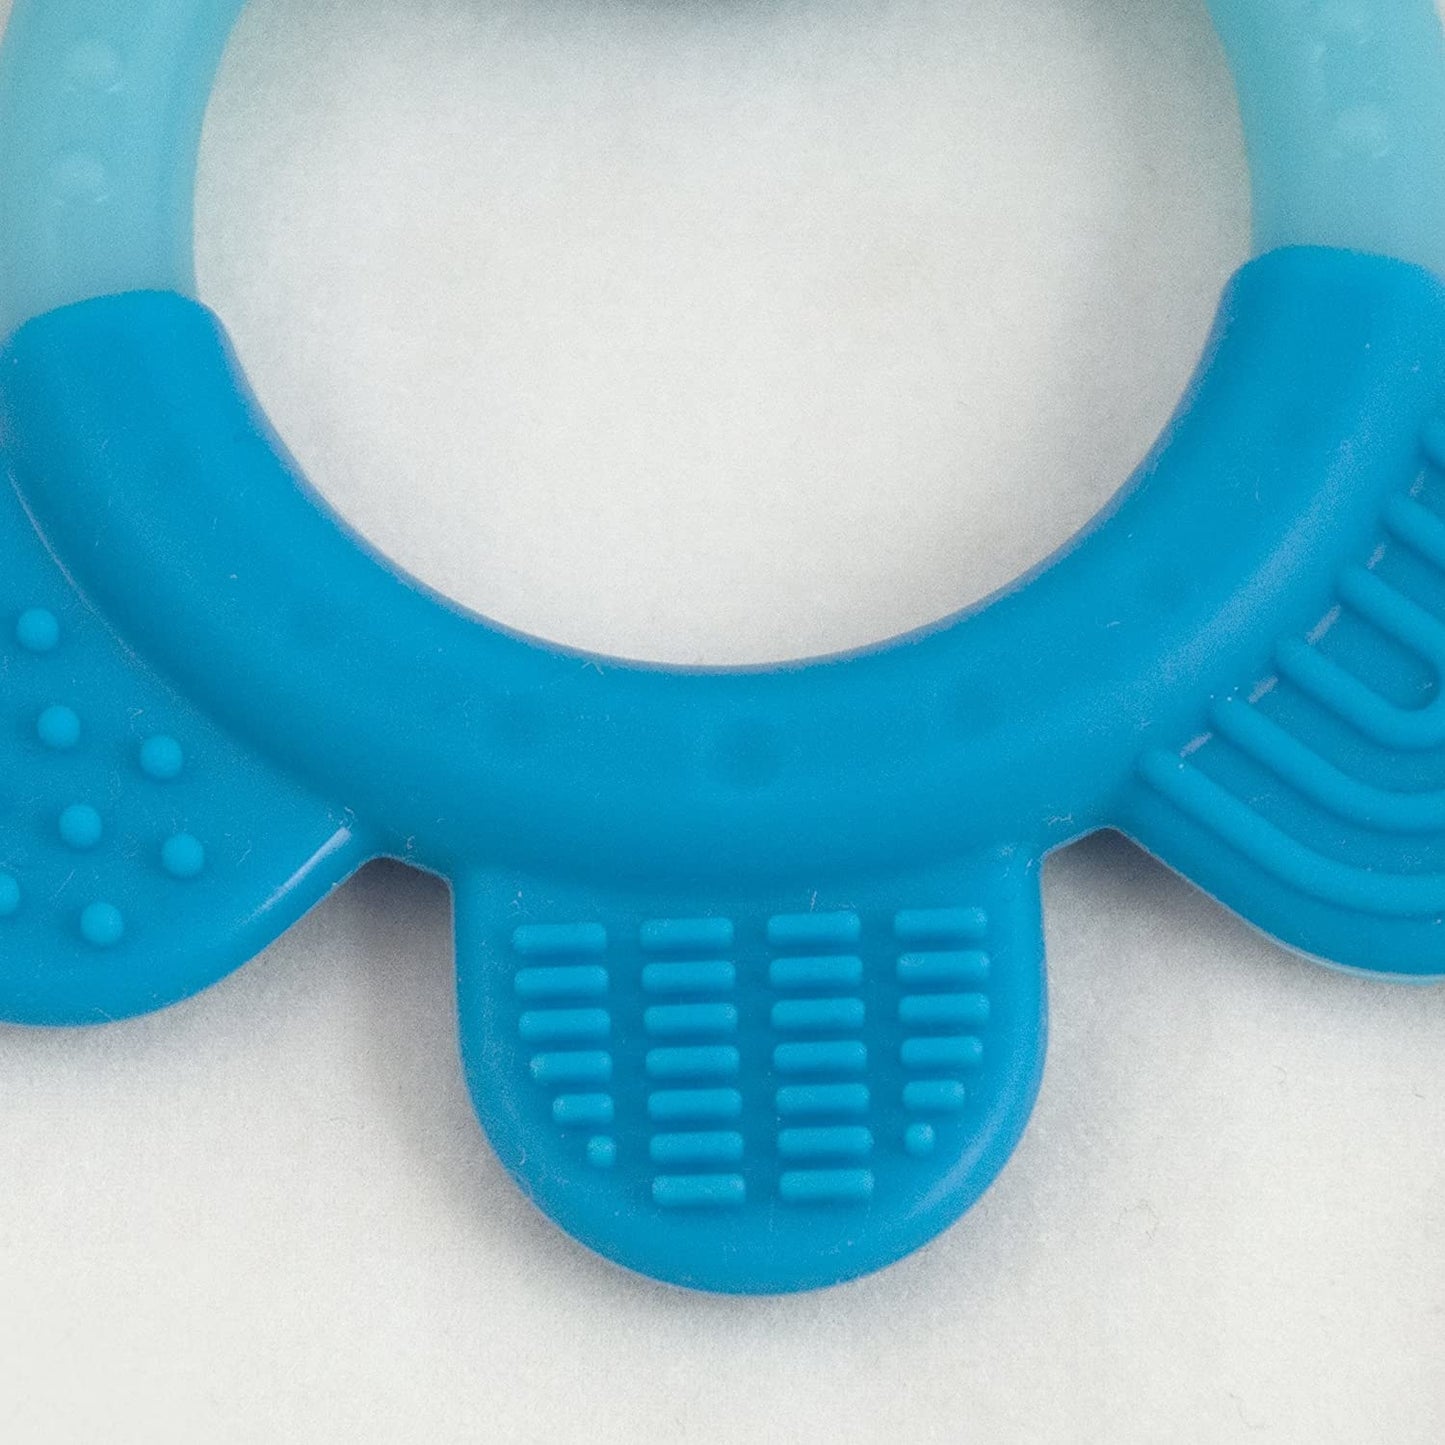 Green Sprouts Silicone Teether